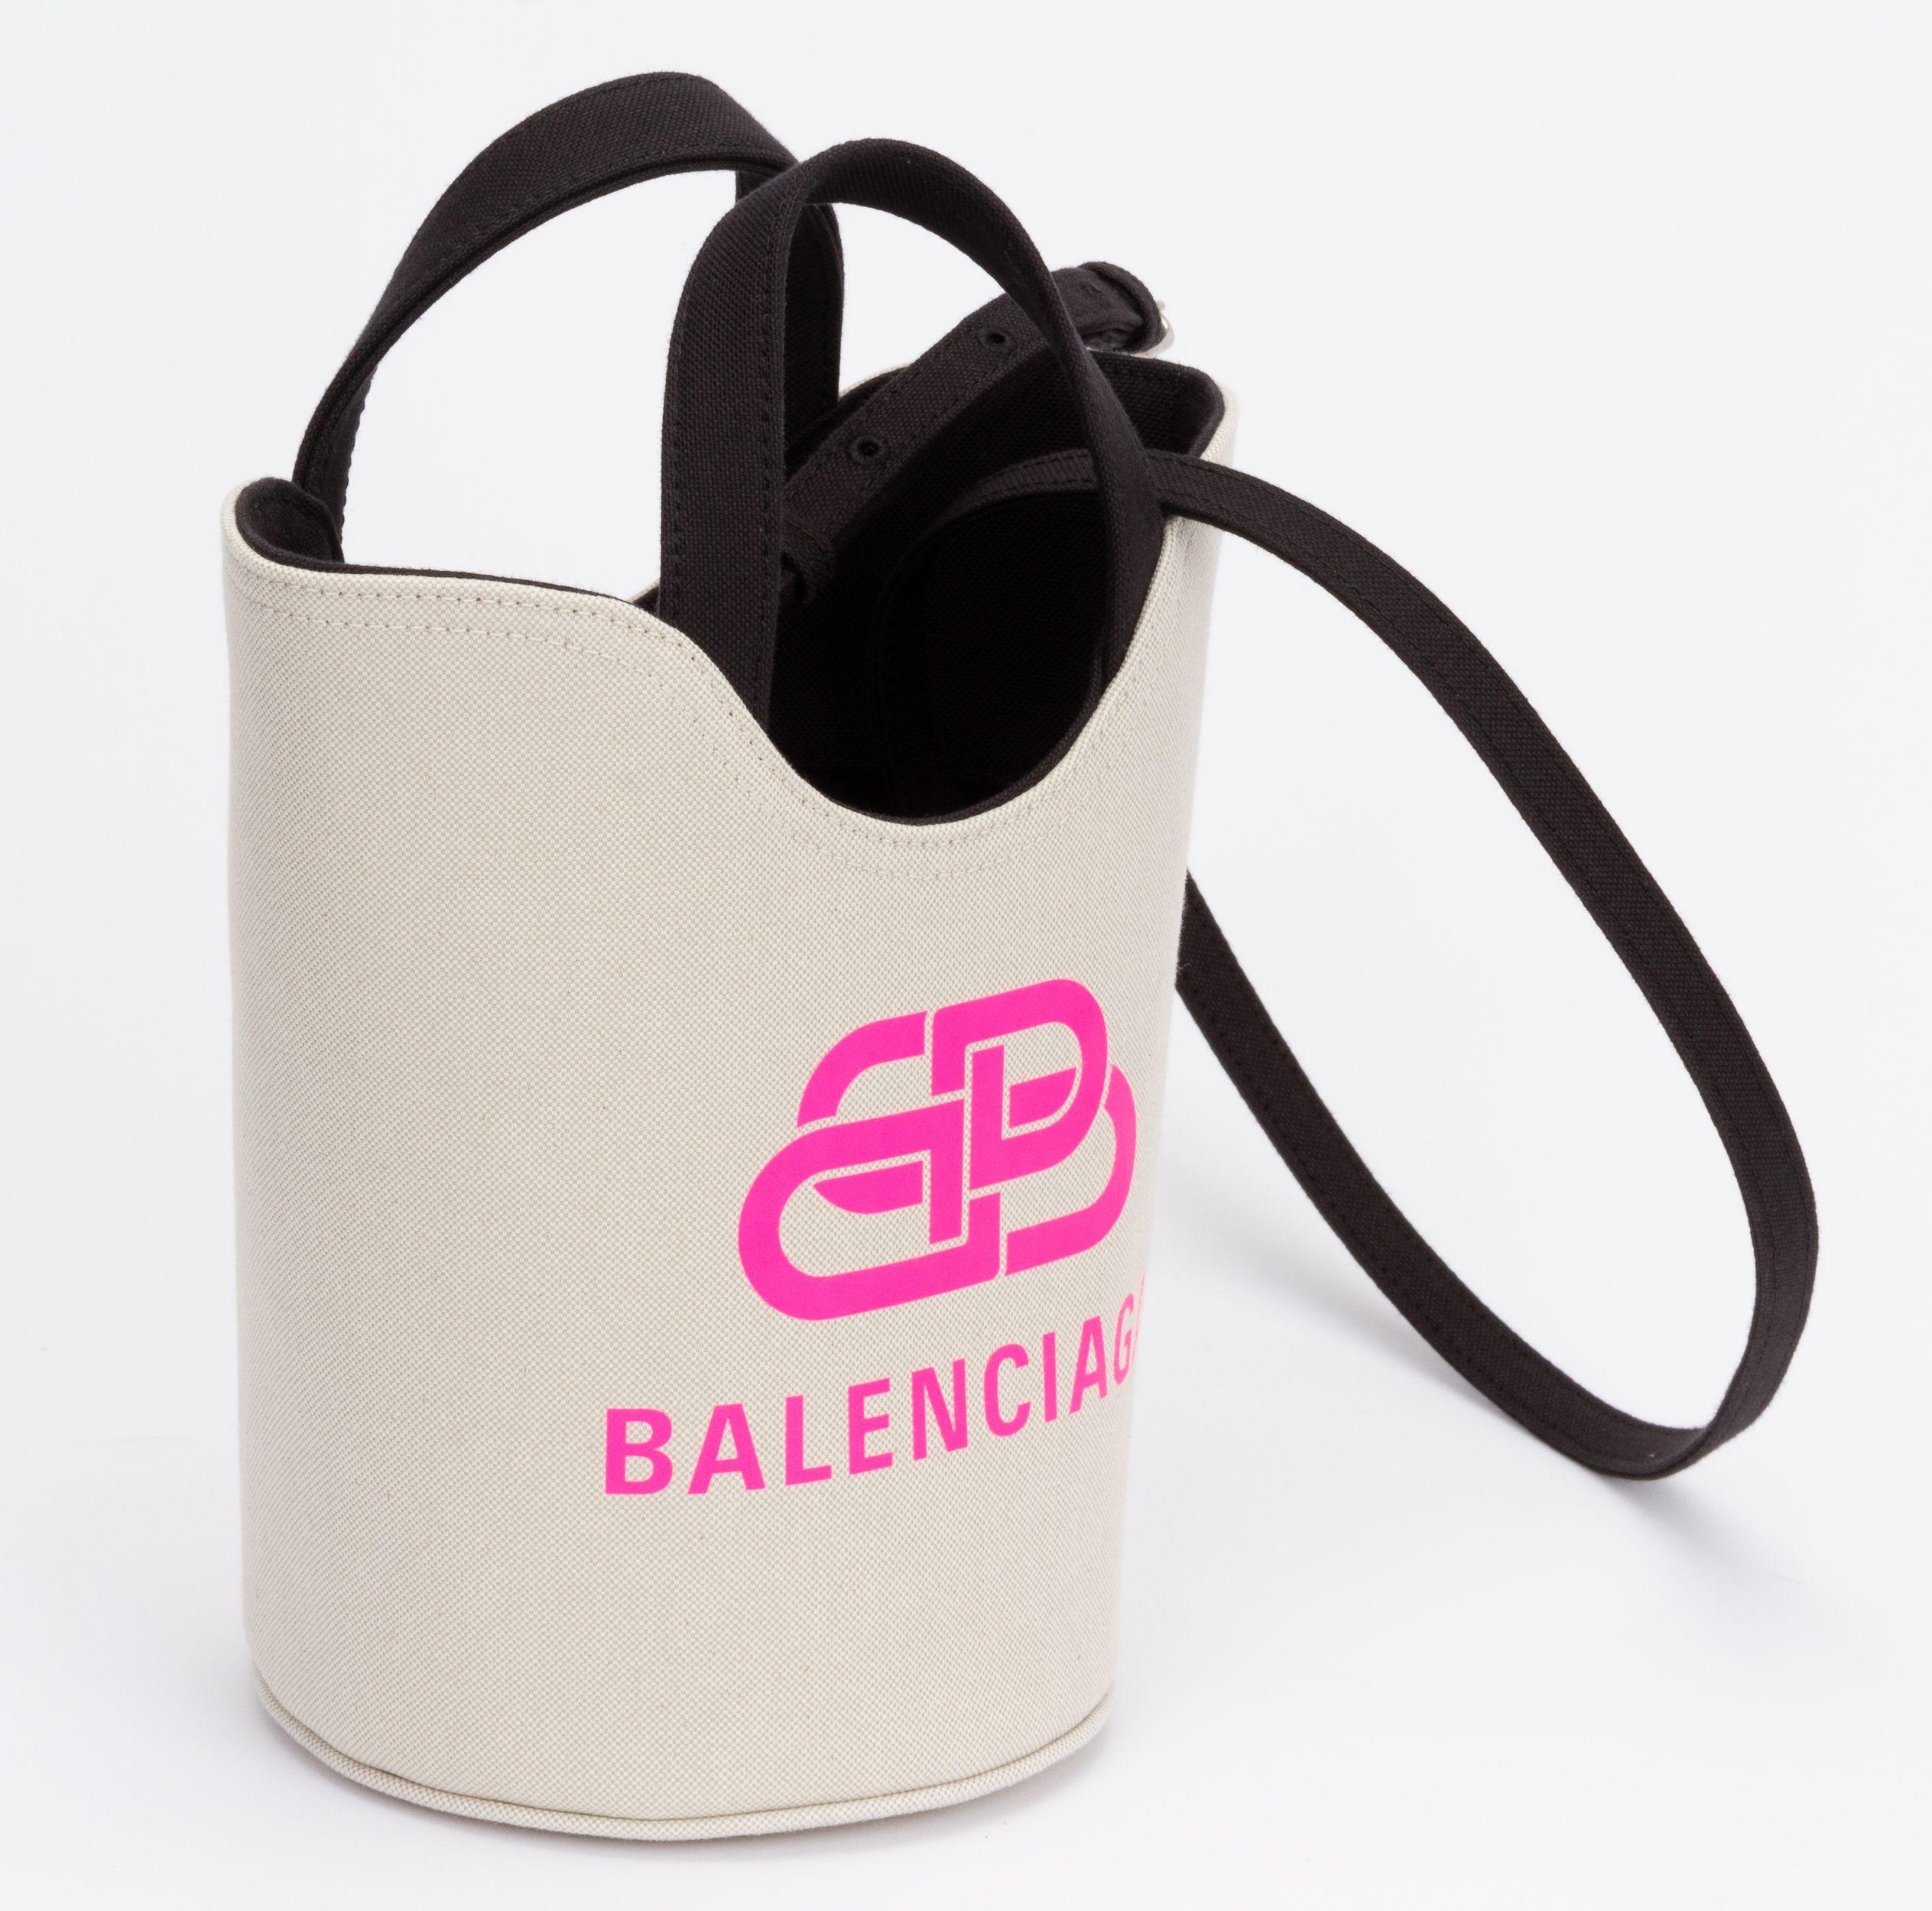 Balenciaga new beige bucket bag with black details and pink front logo. Comes with adjustable and detachable shoulder strap (drop 18.5